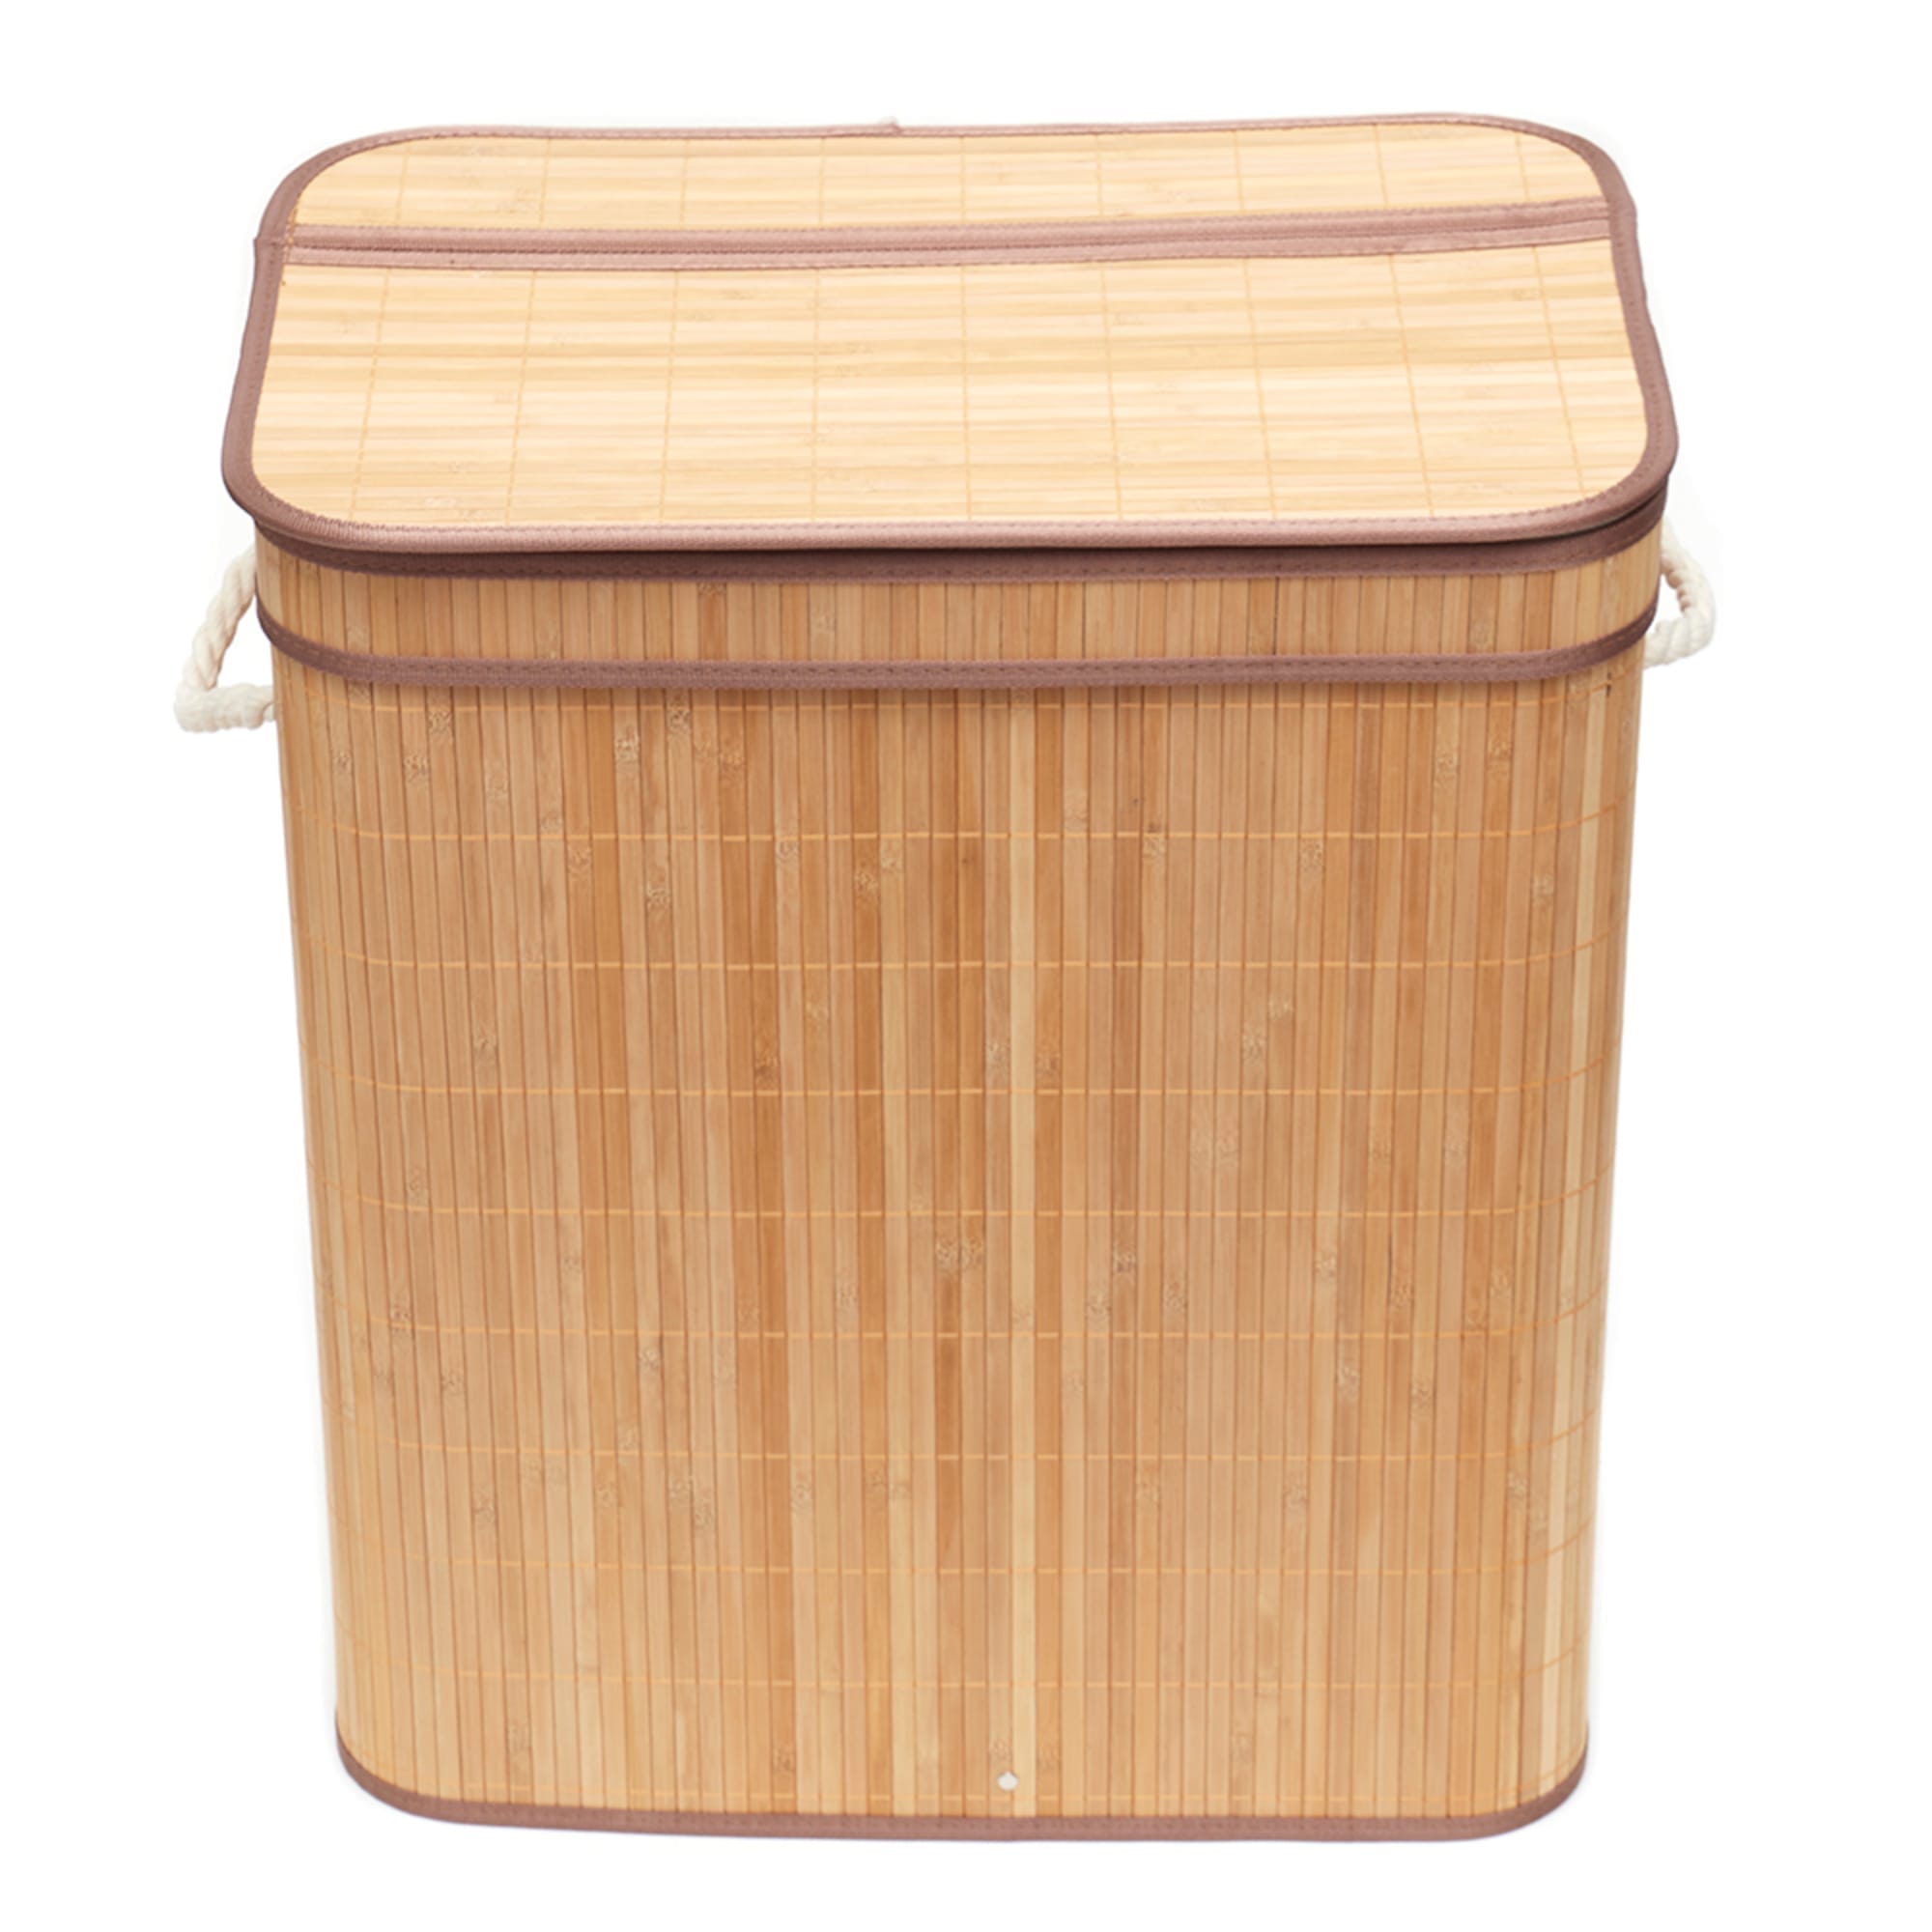 Home Basics 2 Compartment Folding Rectangle Bamboo Hamper with Liner, Natural $25.00 EACH, CASE PACK OF 6